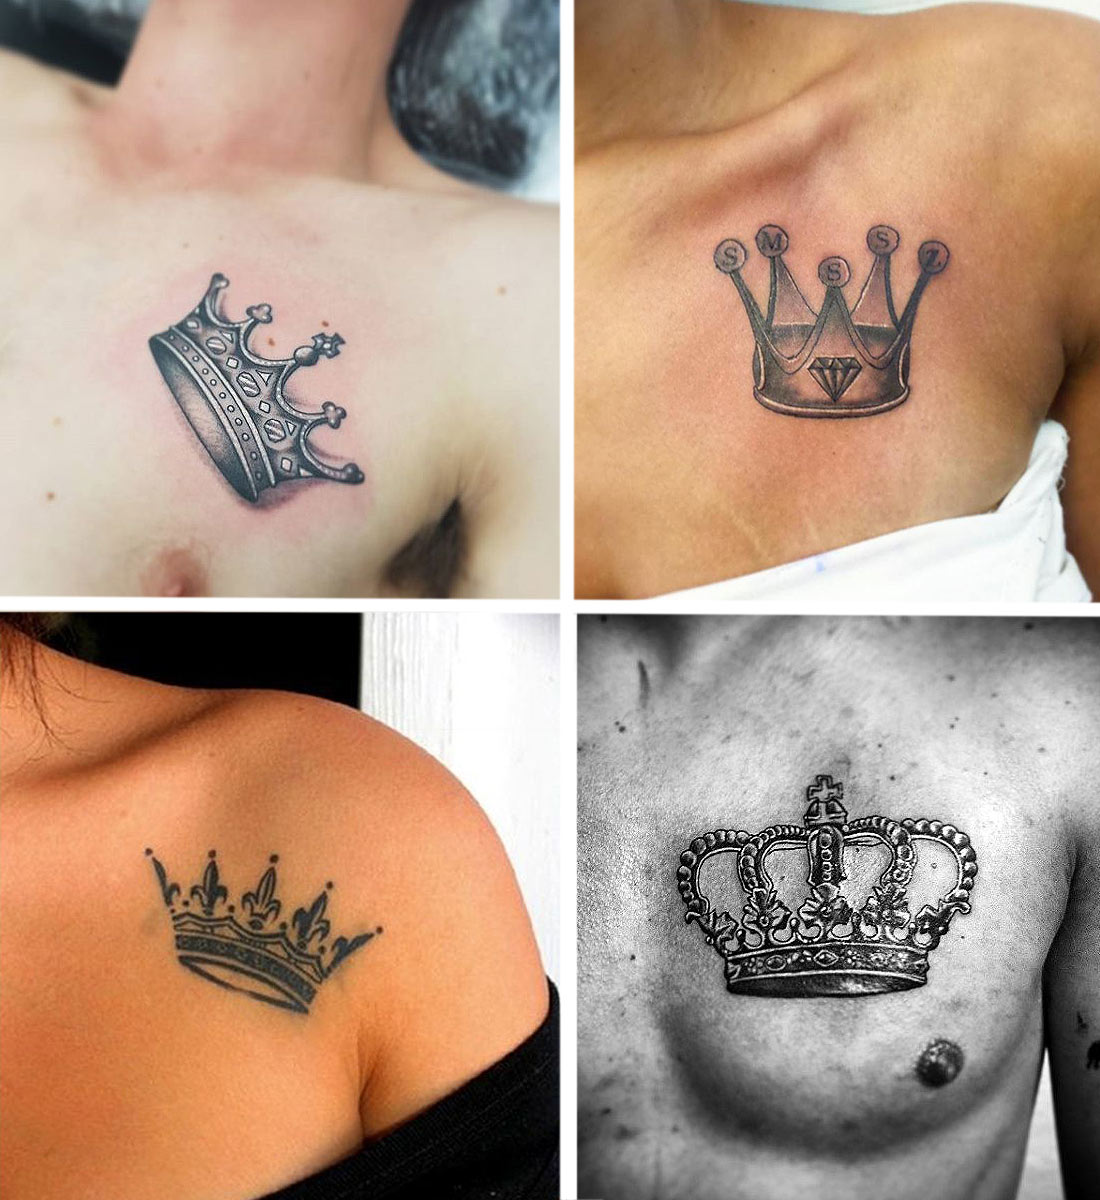 crown-tattoo-on-chest-couple-atttoos-latest-trend-internet